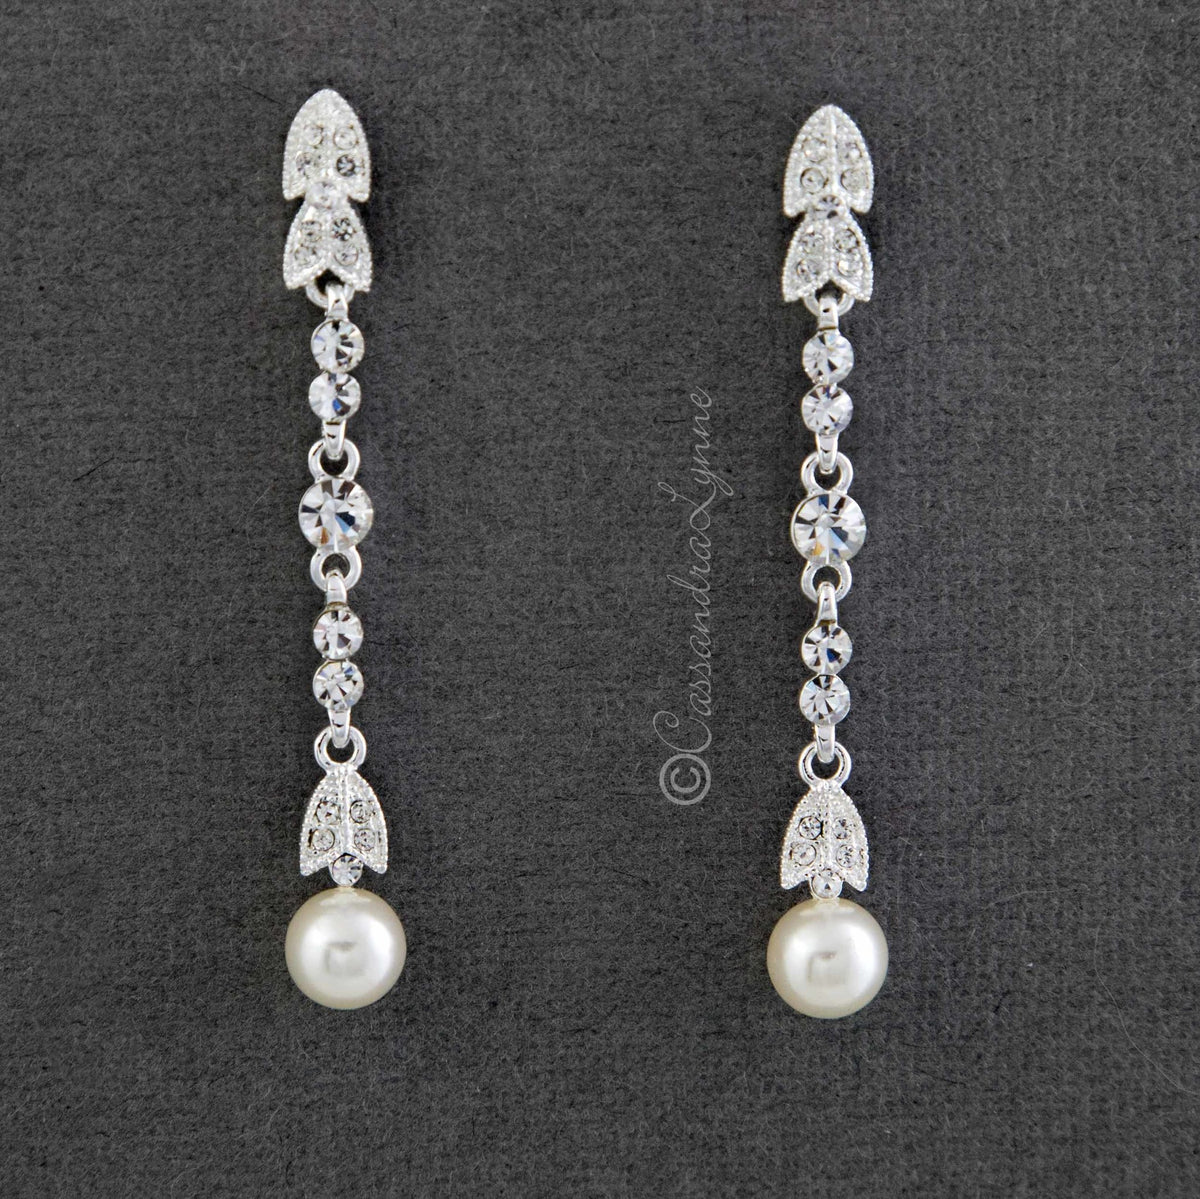 Crystal and Ivory Pearl Earrings - Cassandra Lynne